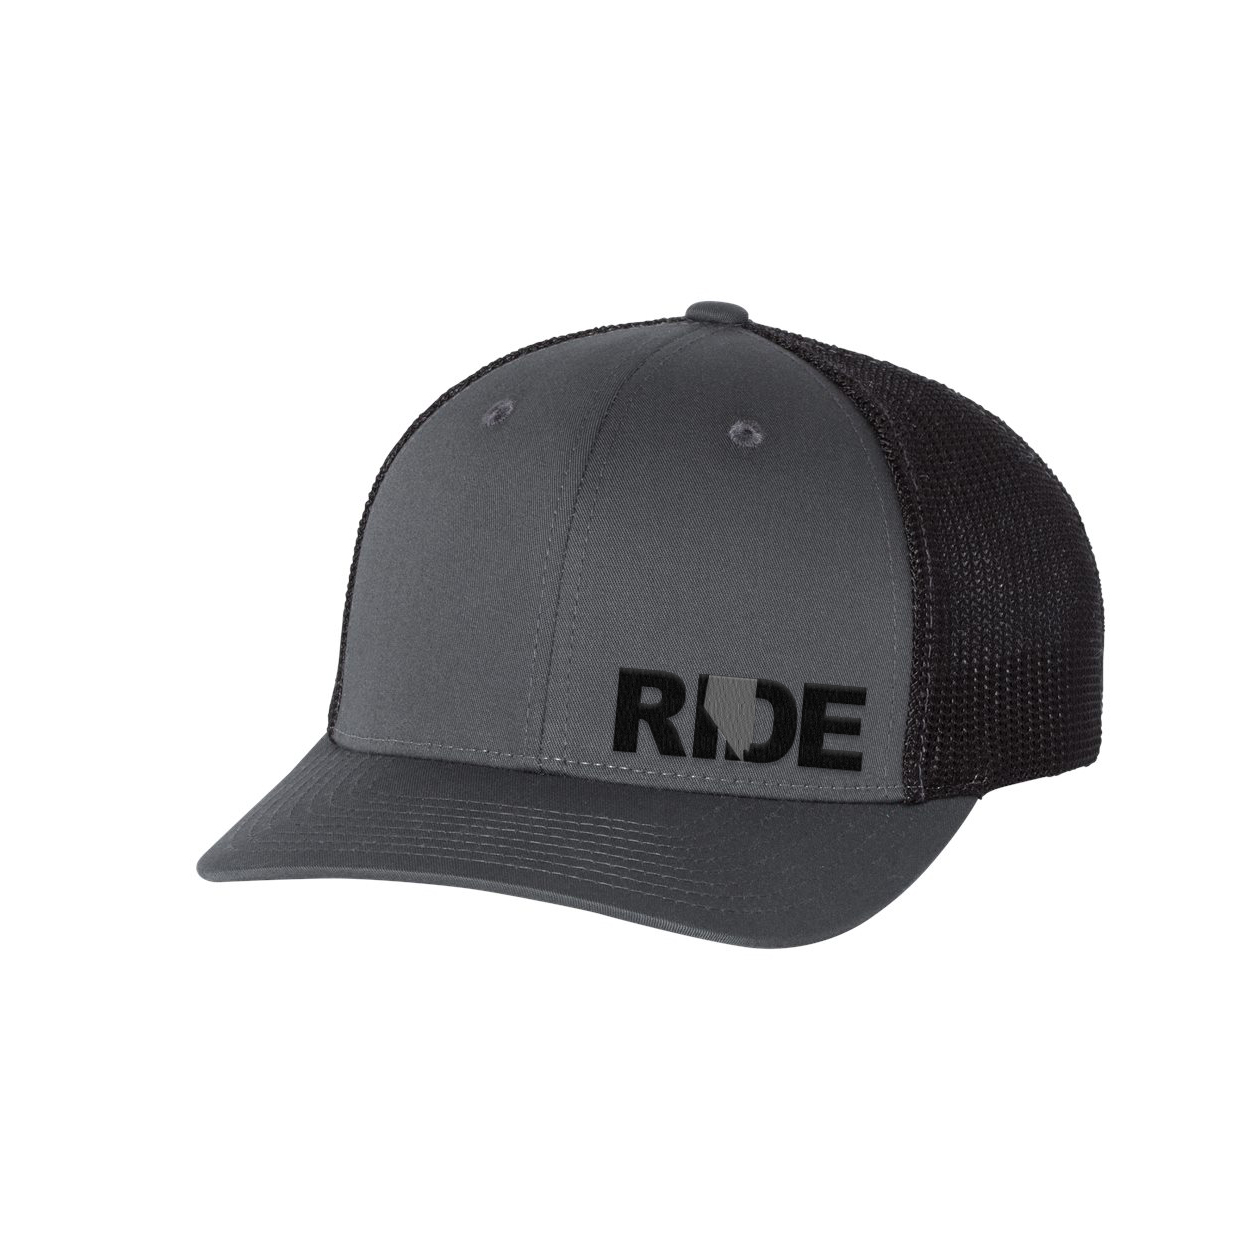 Ride Nevada Night Out Pro Embroidered Snapback Trucker Hat Gray/Black